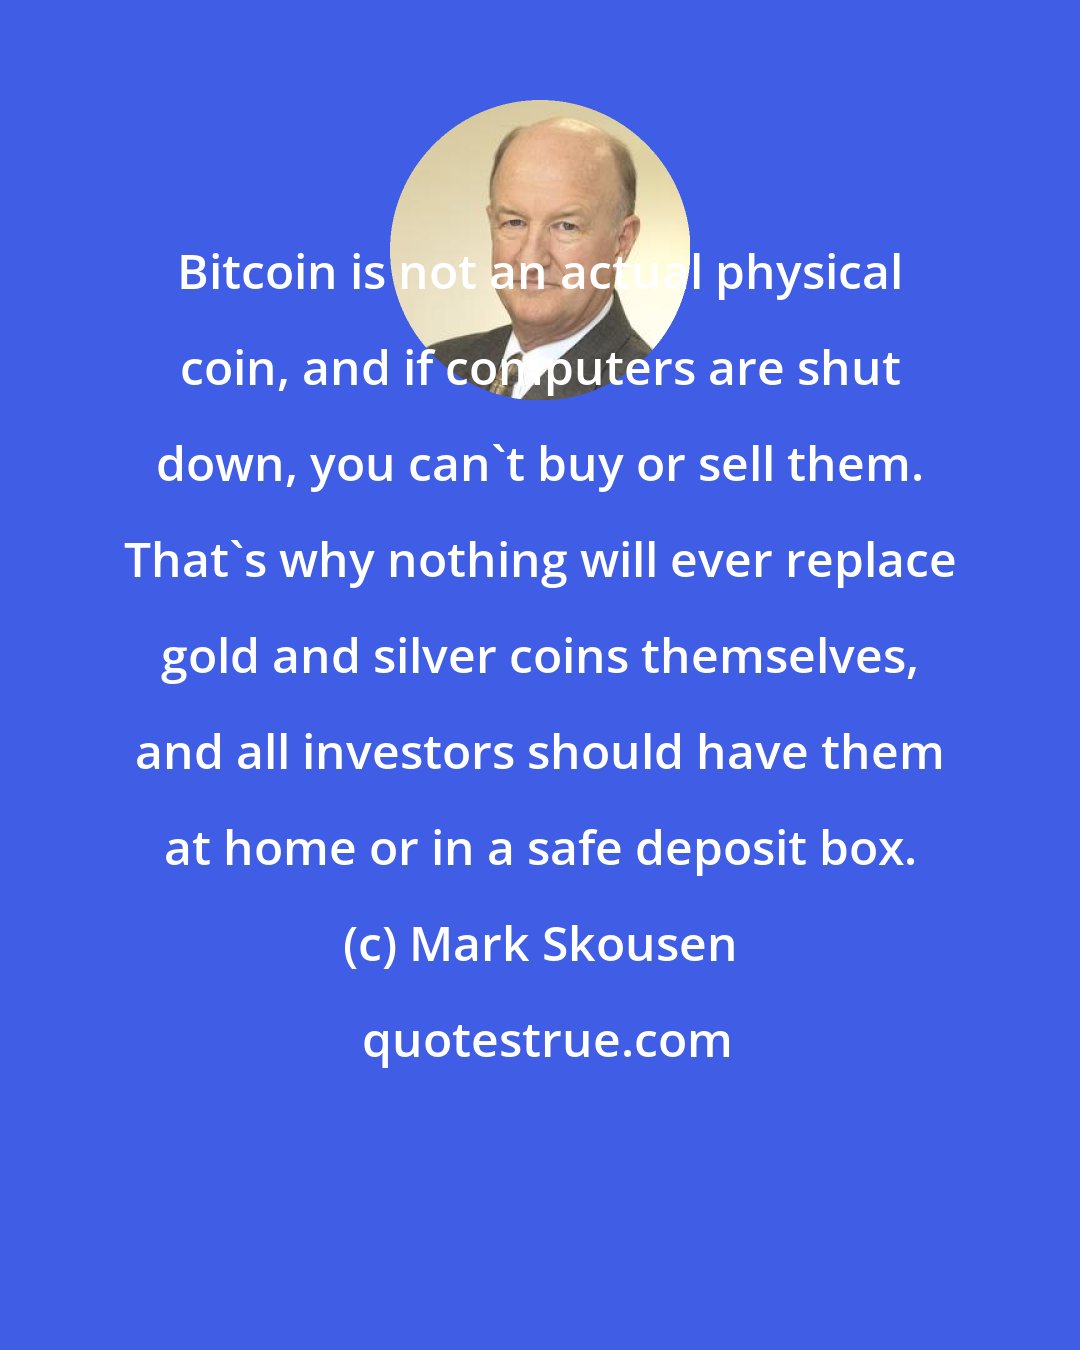 Mark Skousen: Bitcoin is not an actual physical coin, and if computers are shut down, you can't buy or sell them. That's why nothing will ever replace gold and silver coins themselves, and all investors should have them at home or in a safe deposit box.